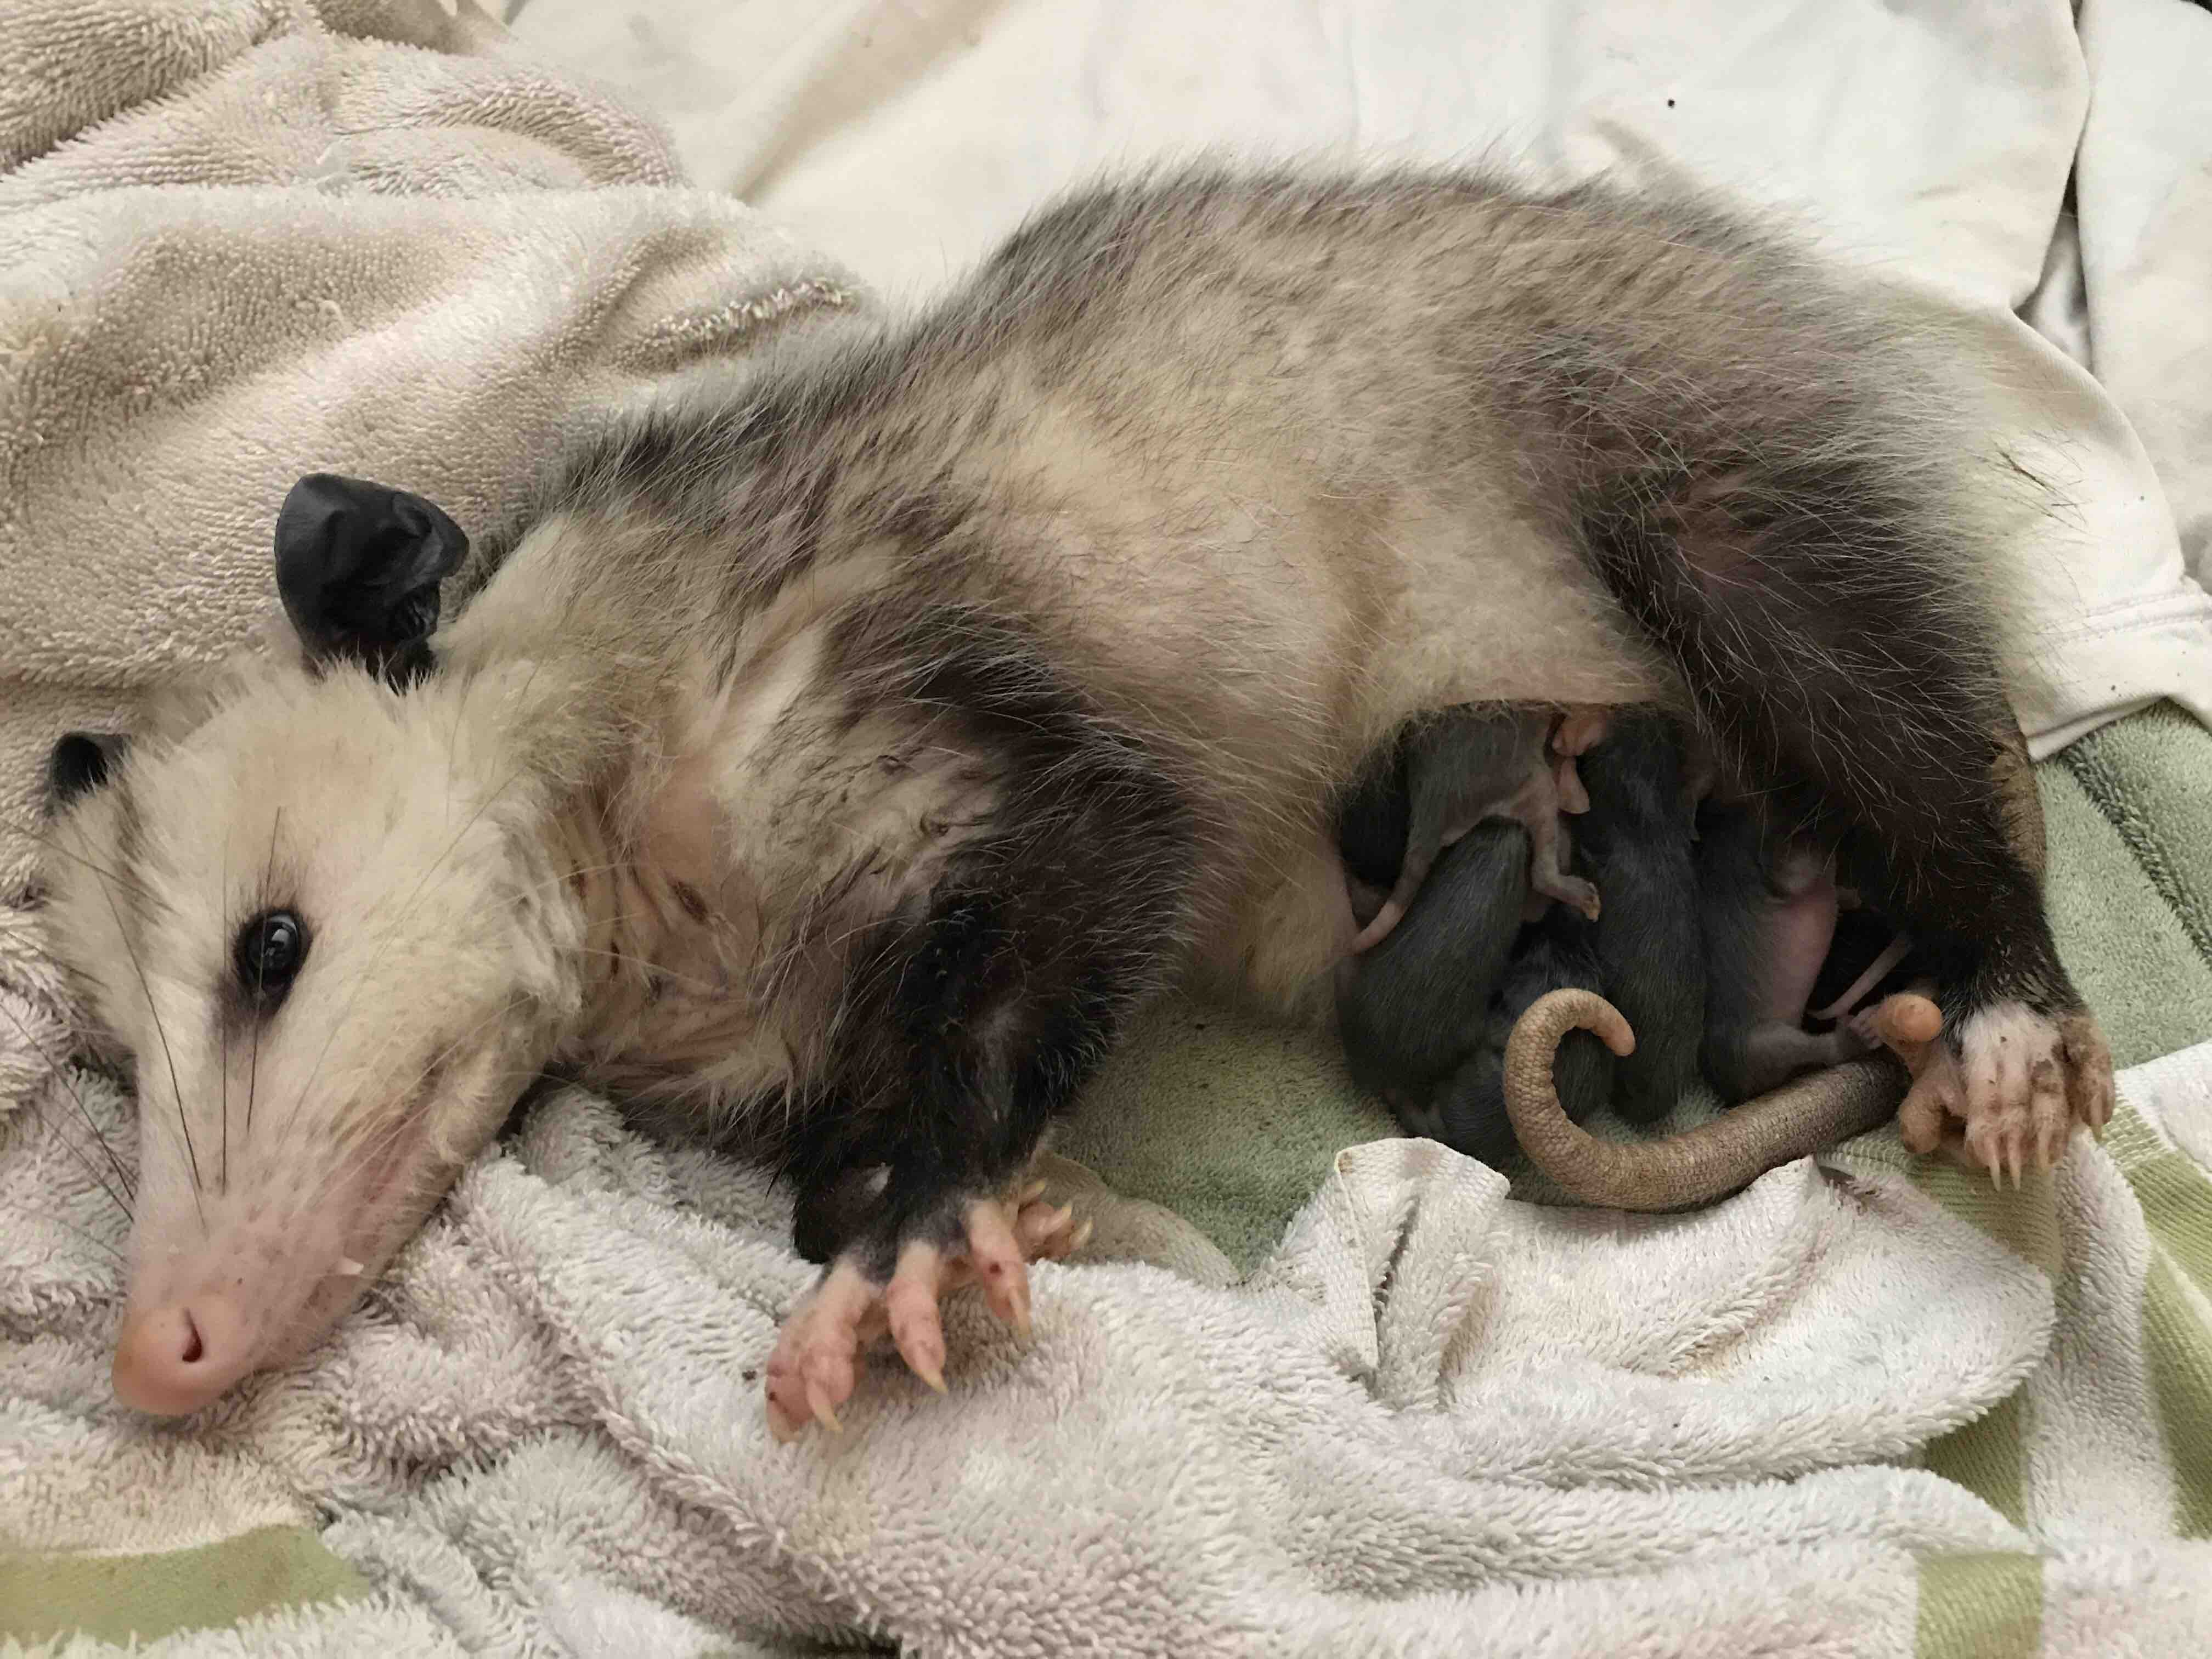 Fundraiser by Lori King : Save Momma Opossum and babies